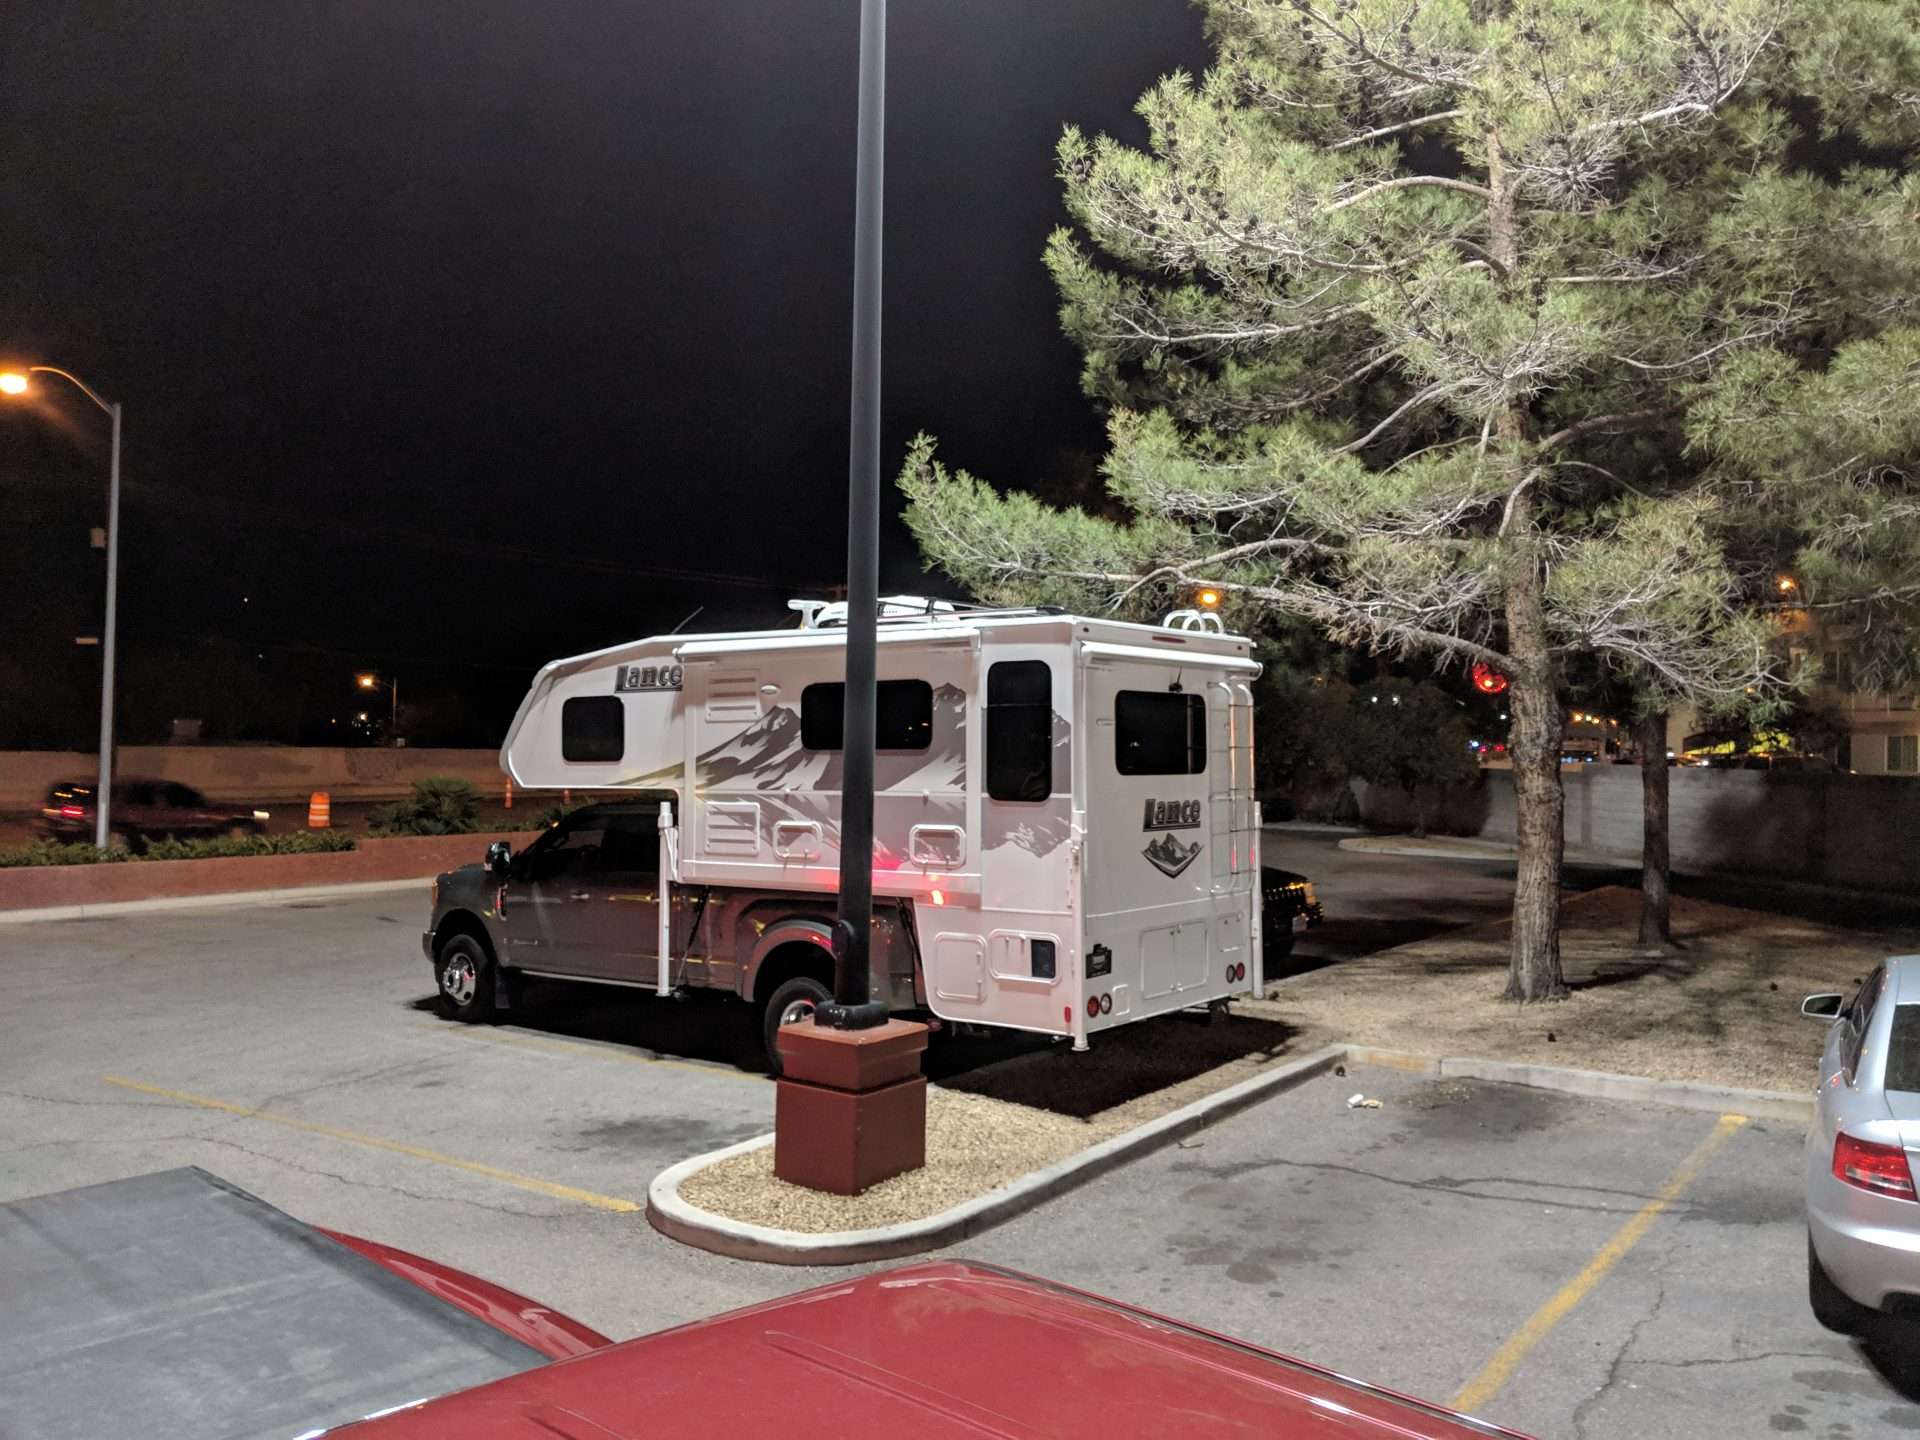 Truck camper parked in parking lot at night stealth camping in Florida